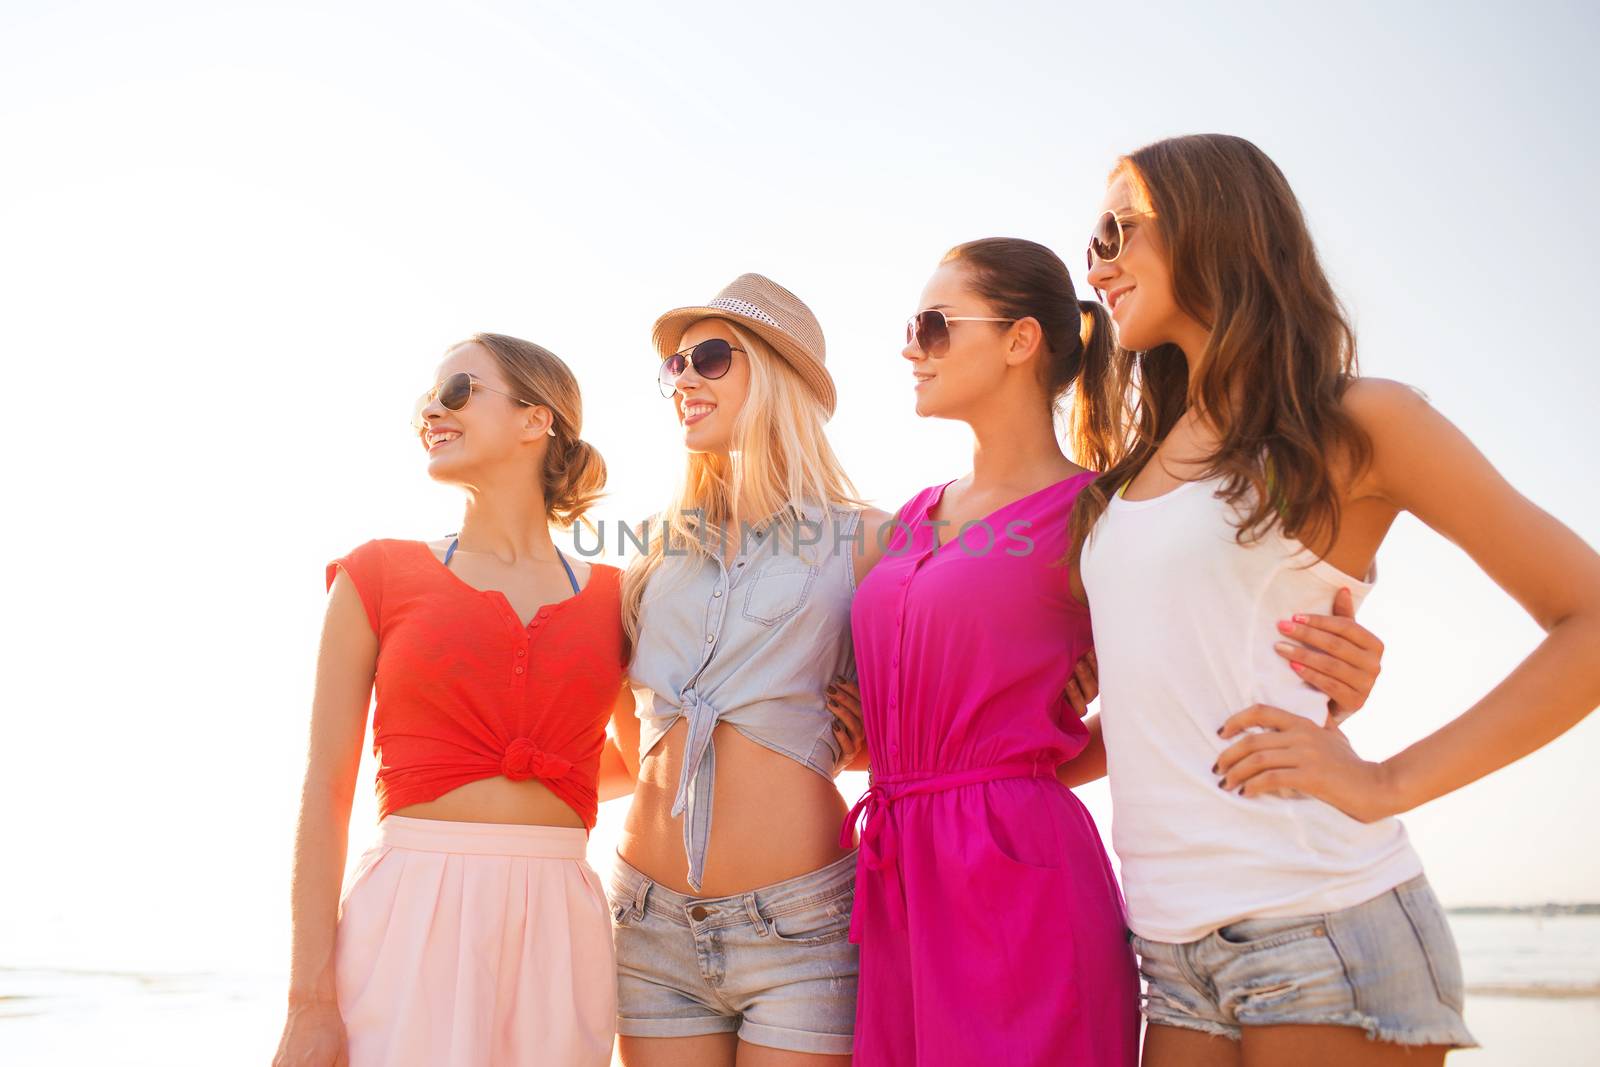 group of smiling women in sunglasses on beach by dolgachov